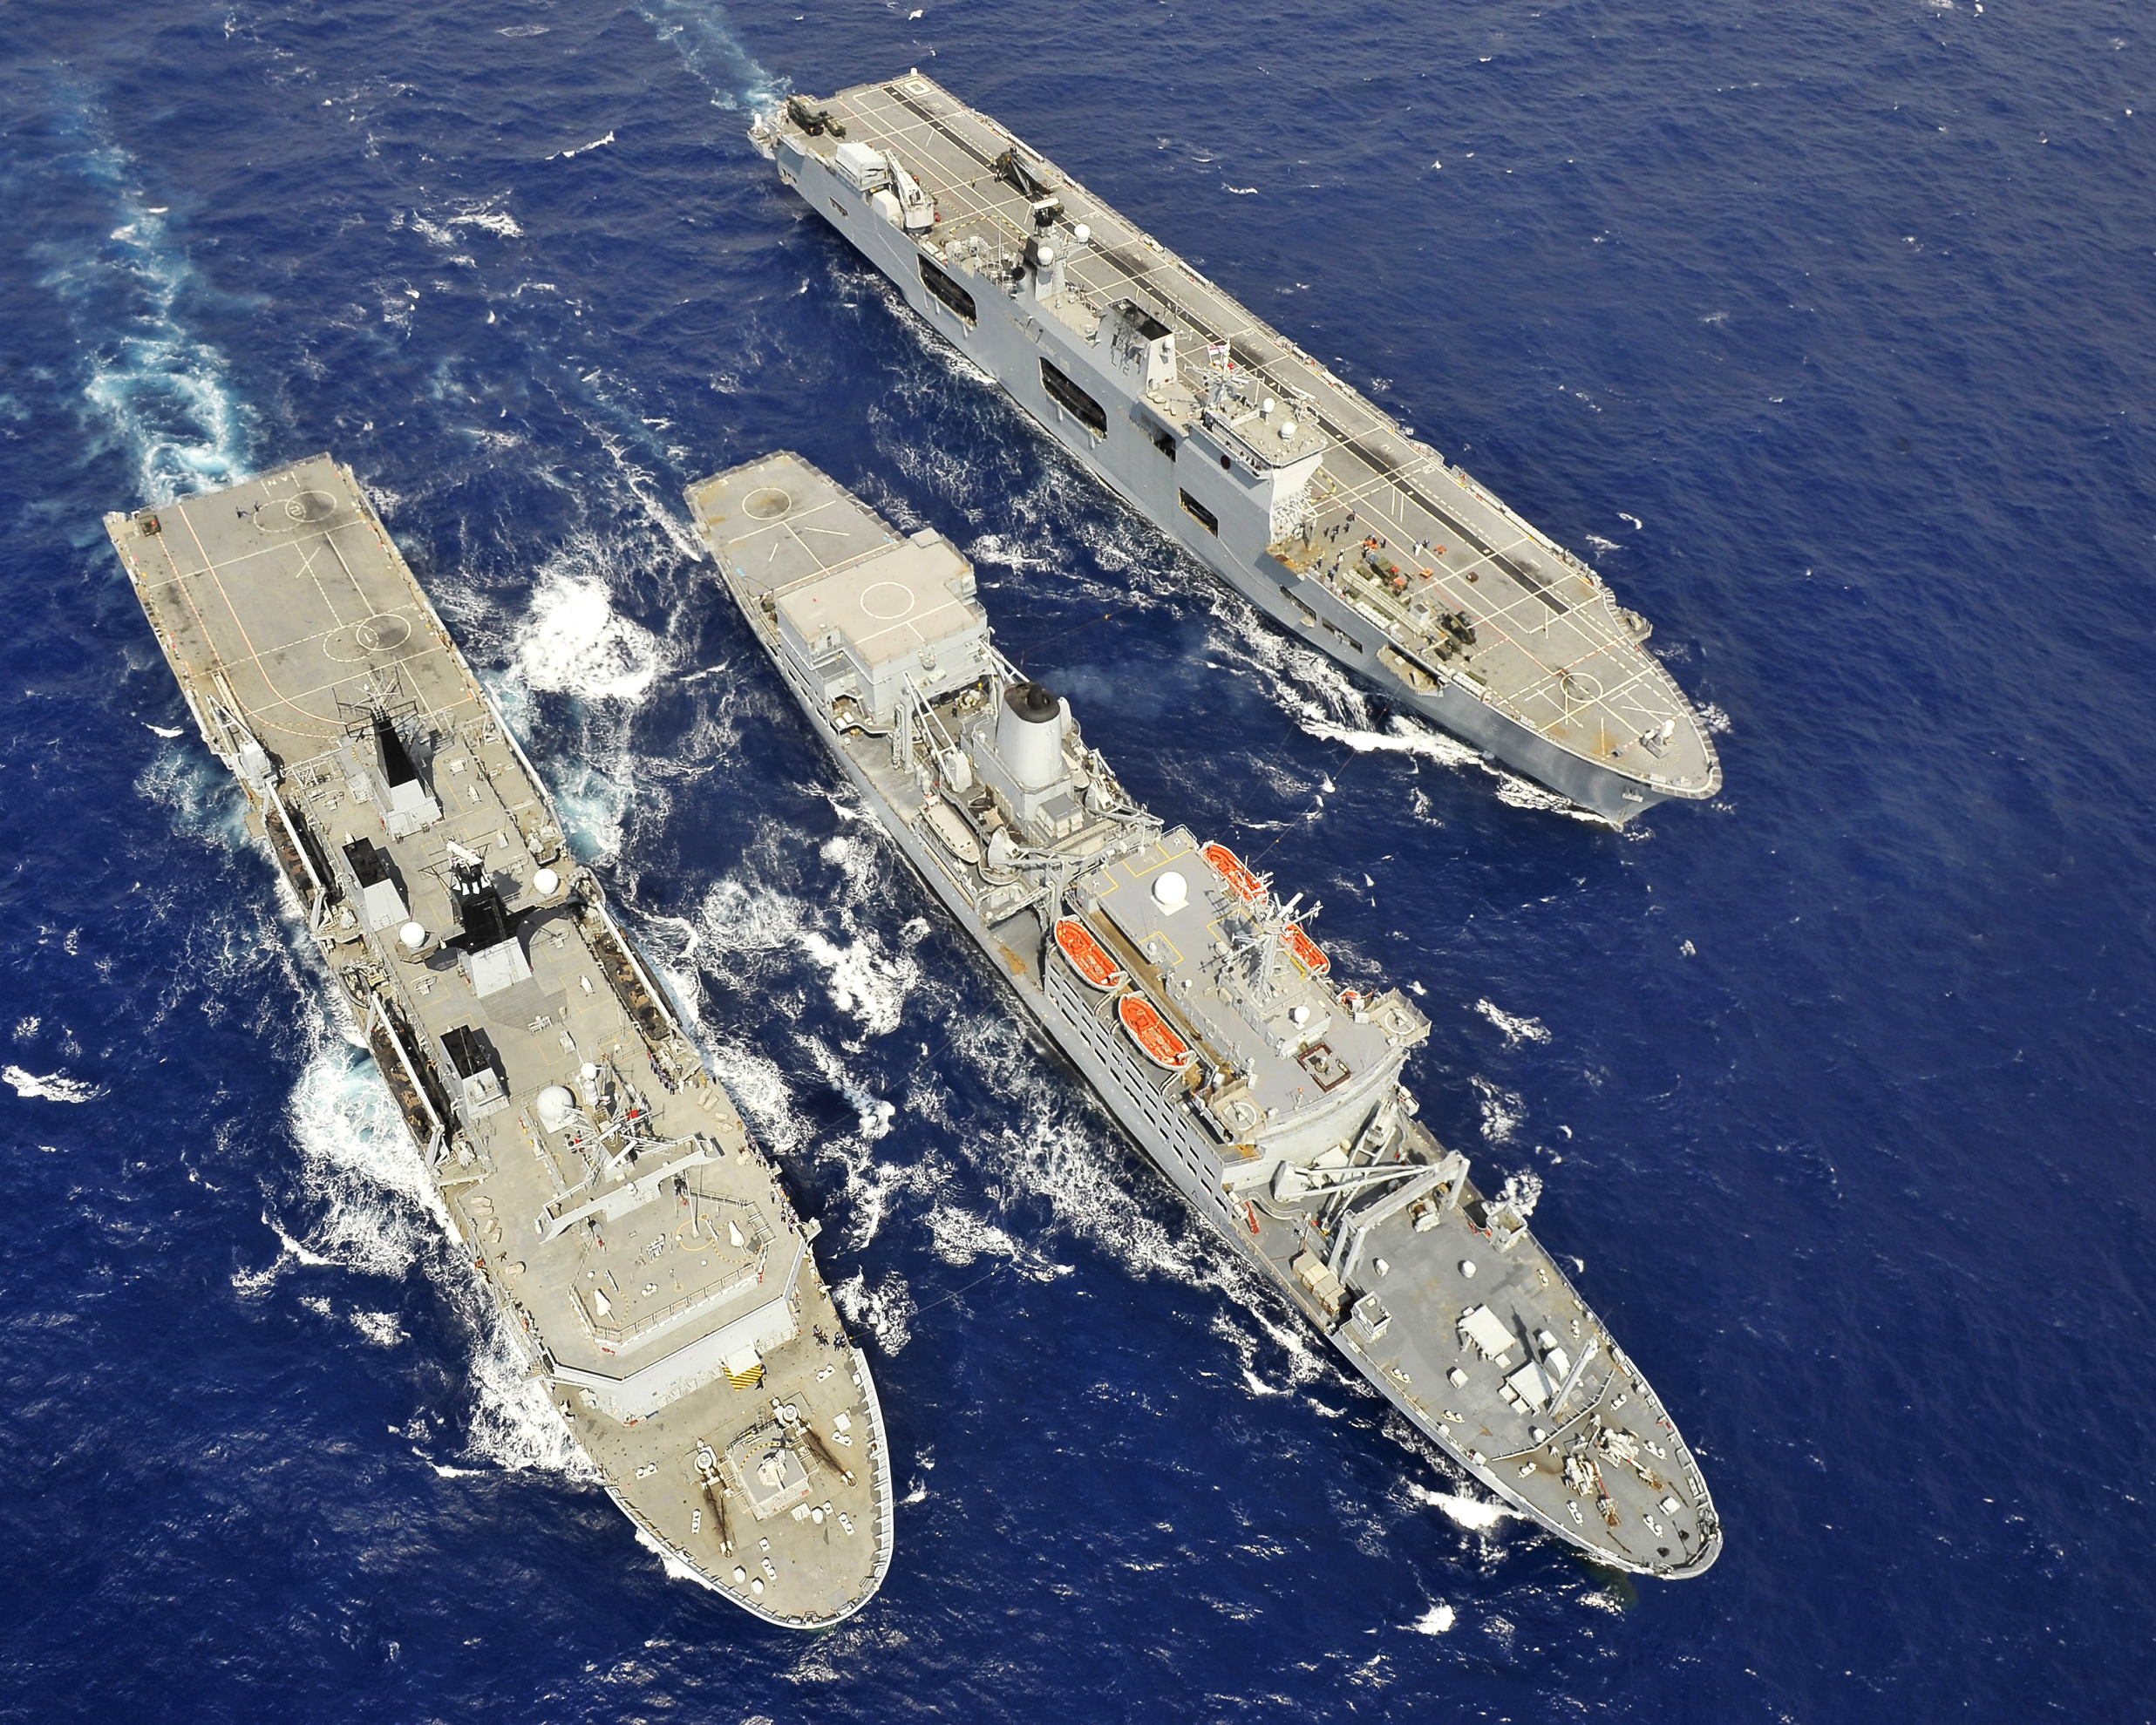 HMS_Albion,_RFA_Fort_Rosalie_and_HMS_Ocean_Conduct_a_Replenishment_at_Sea_During_Ex_Cypriot_Lion_MOD_45152750.jpg